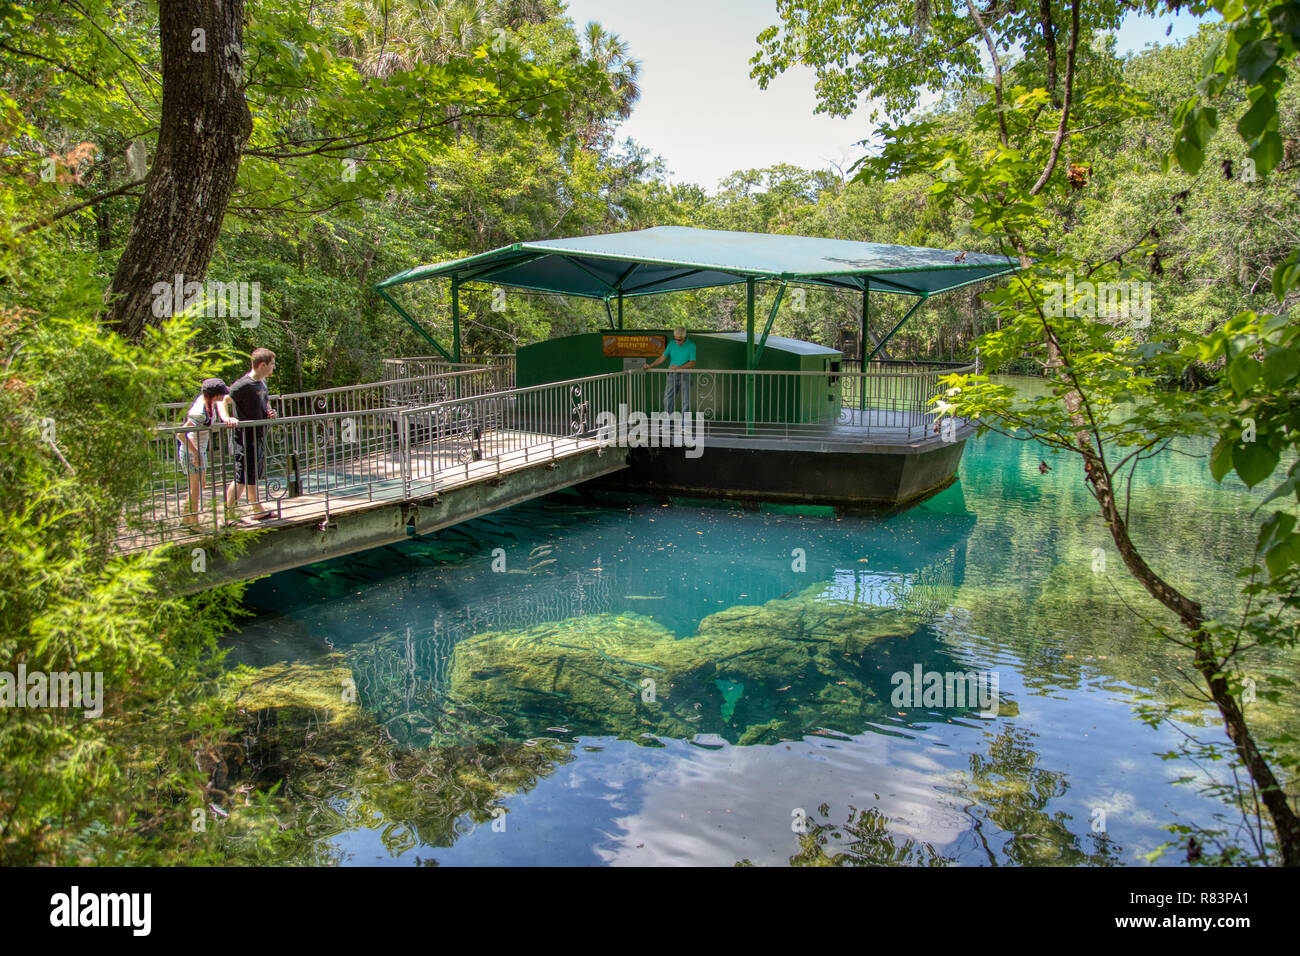 MAY 22, 2013, ELLIE SCHILLER HOMOSASSA SPRINGS, FL: The Fish Bowl observatory at this Florida state park lets guests see underwater wildlife. Stock Photo